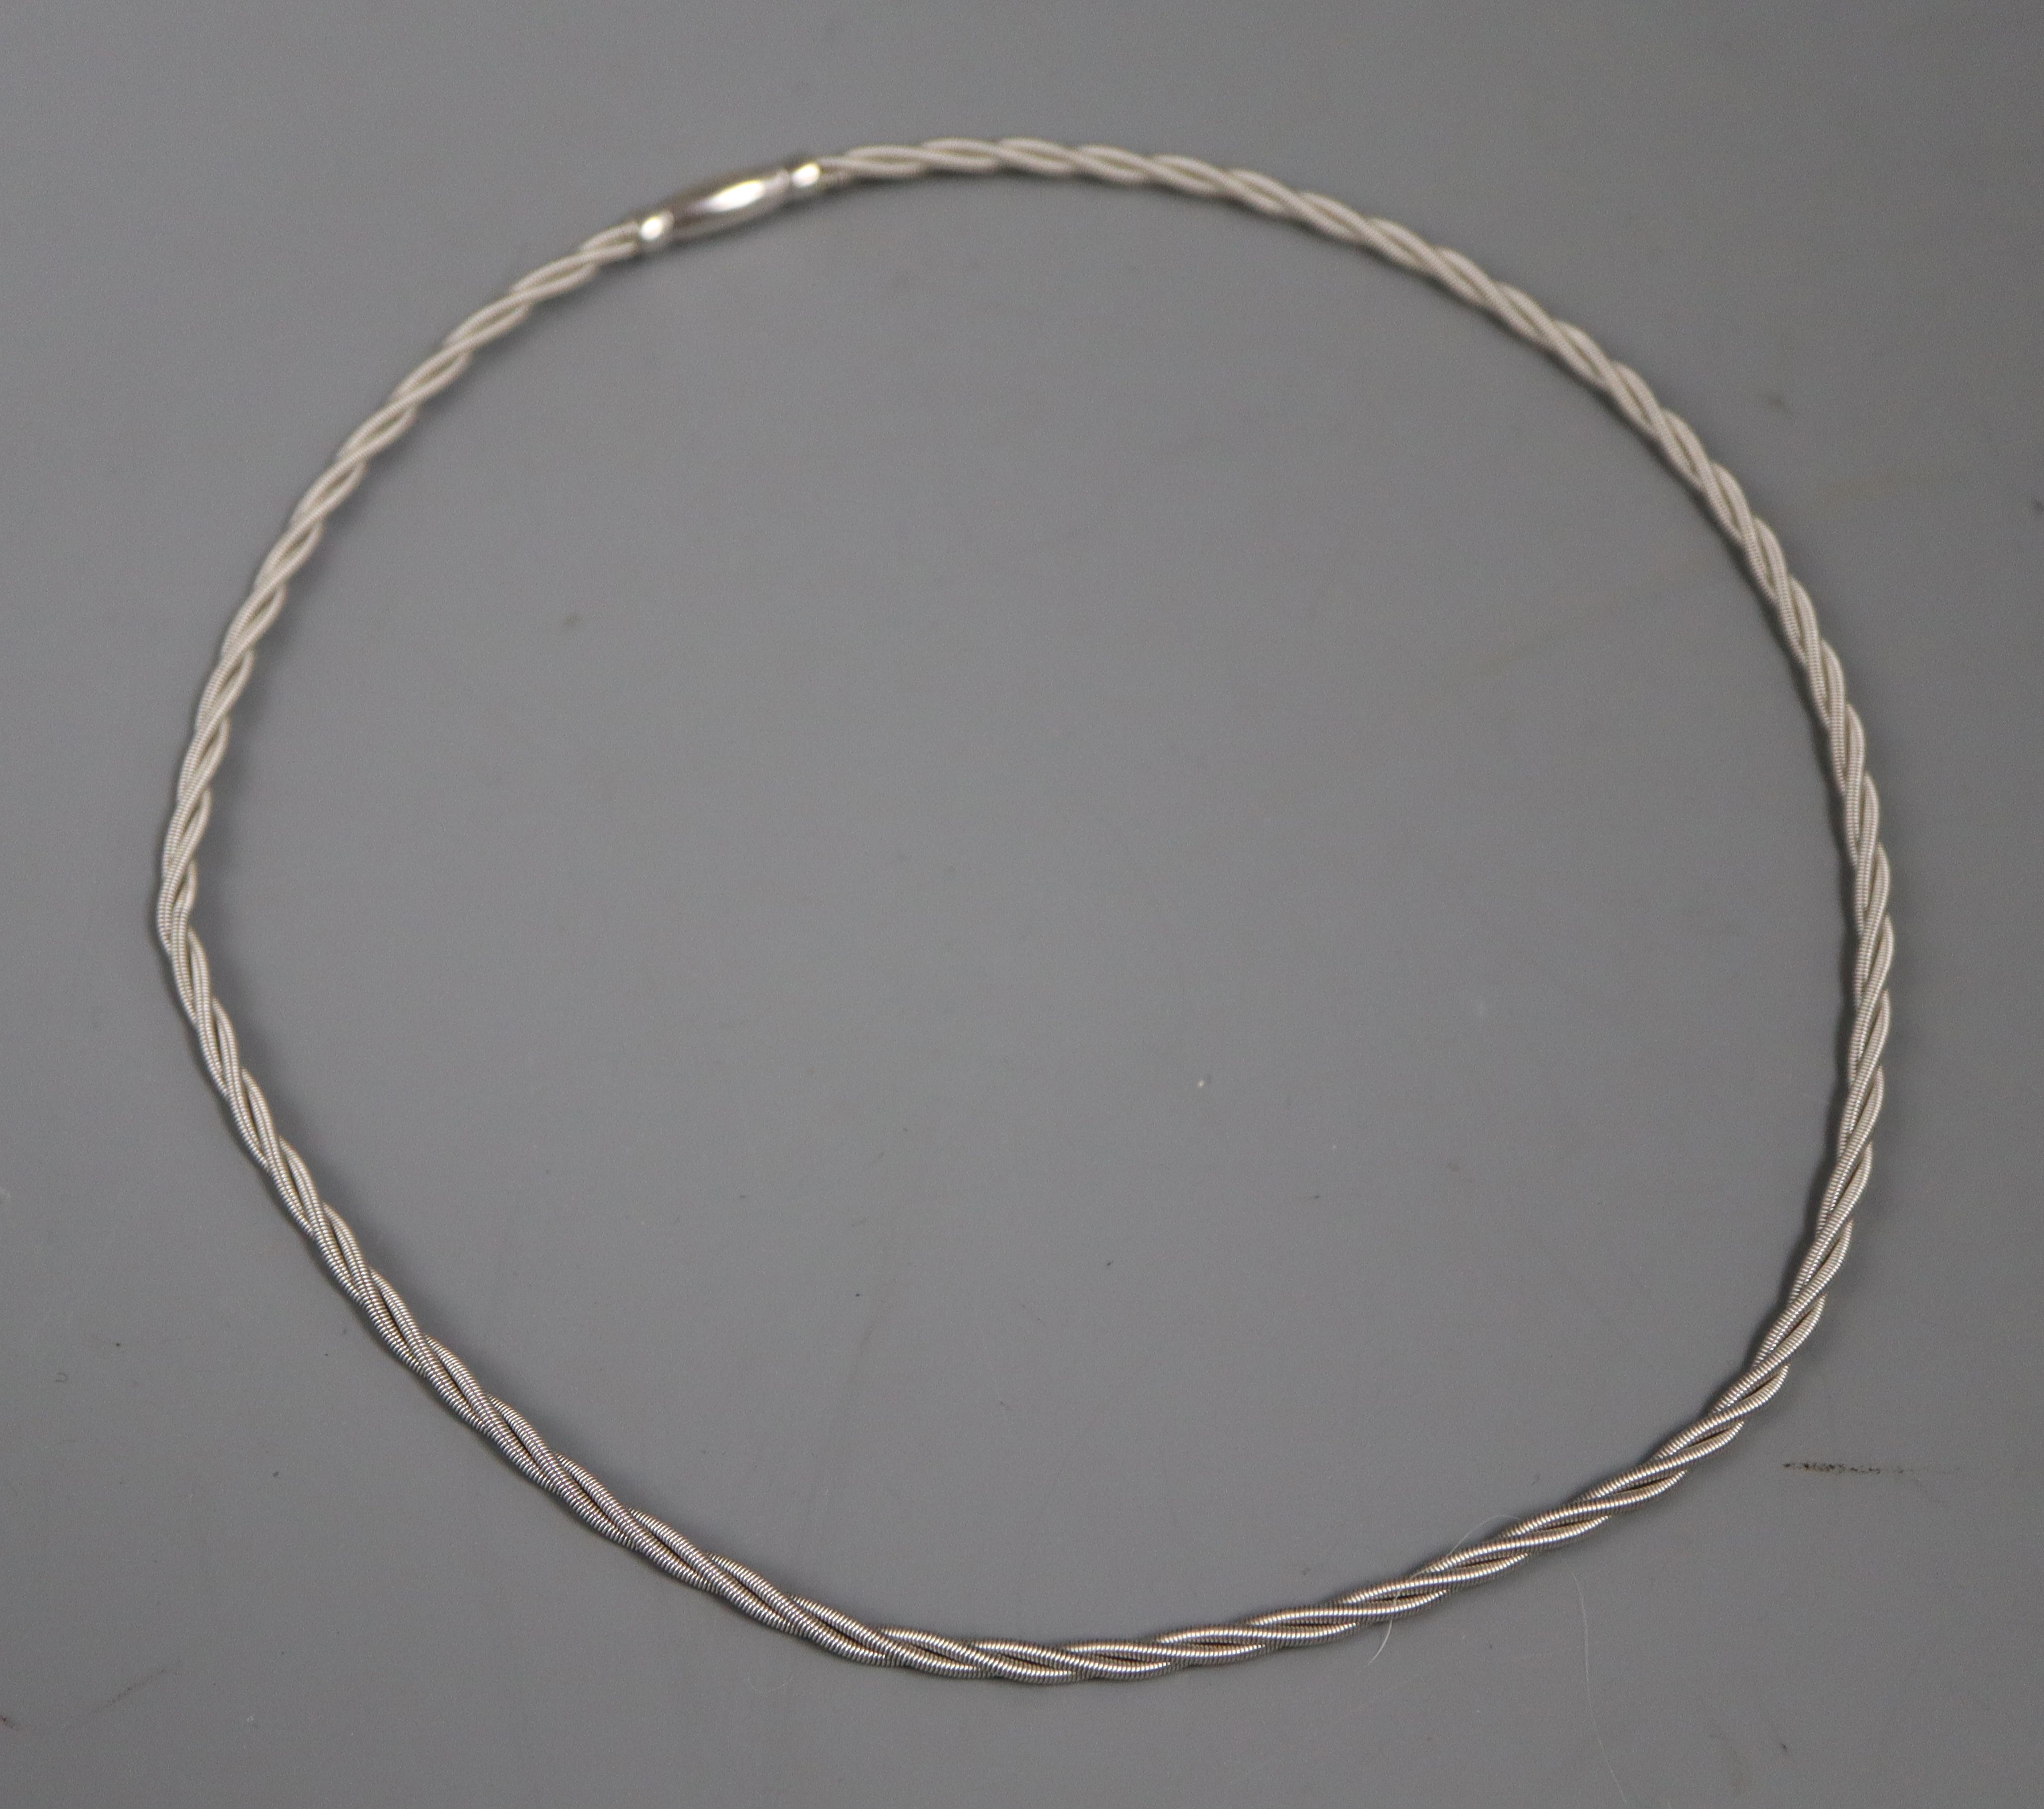 An 18ct white gold ropetwist necklace with barrel screw clasp